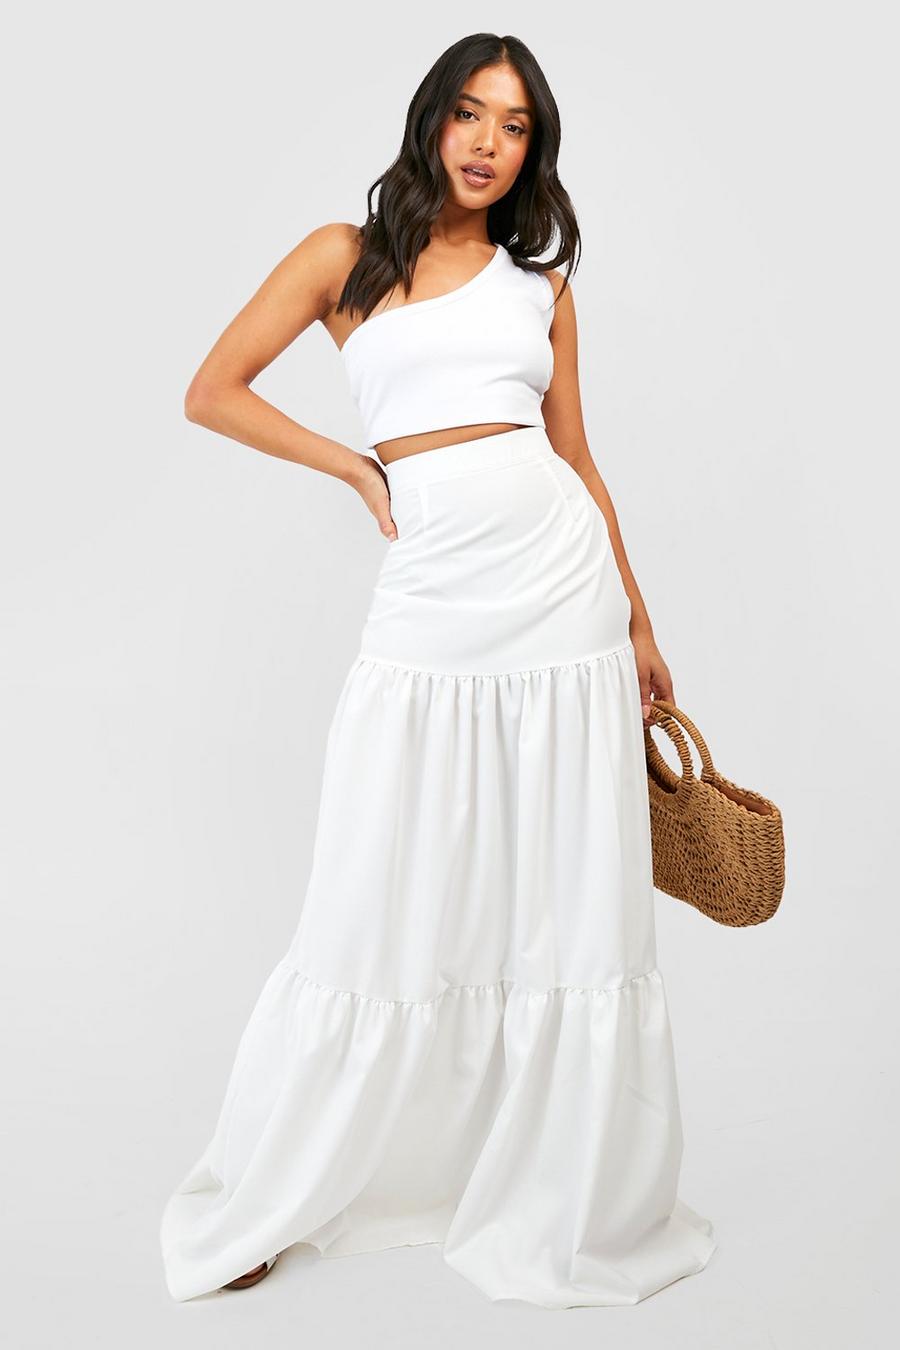 White Engagement Party Dresses 